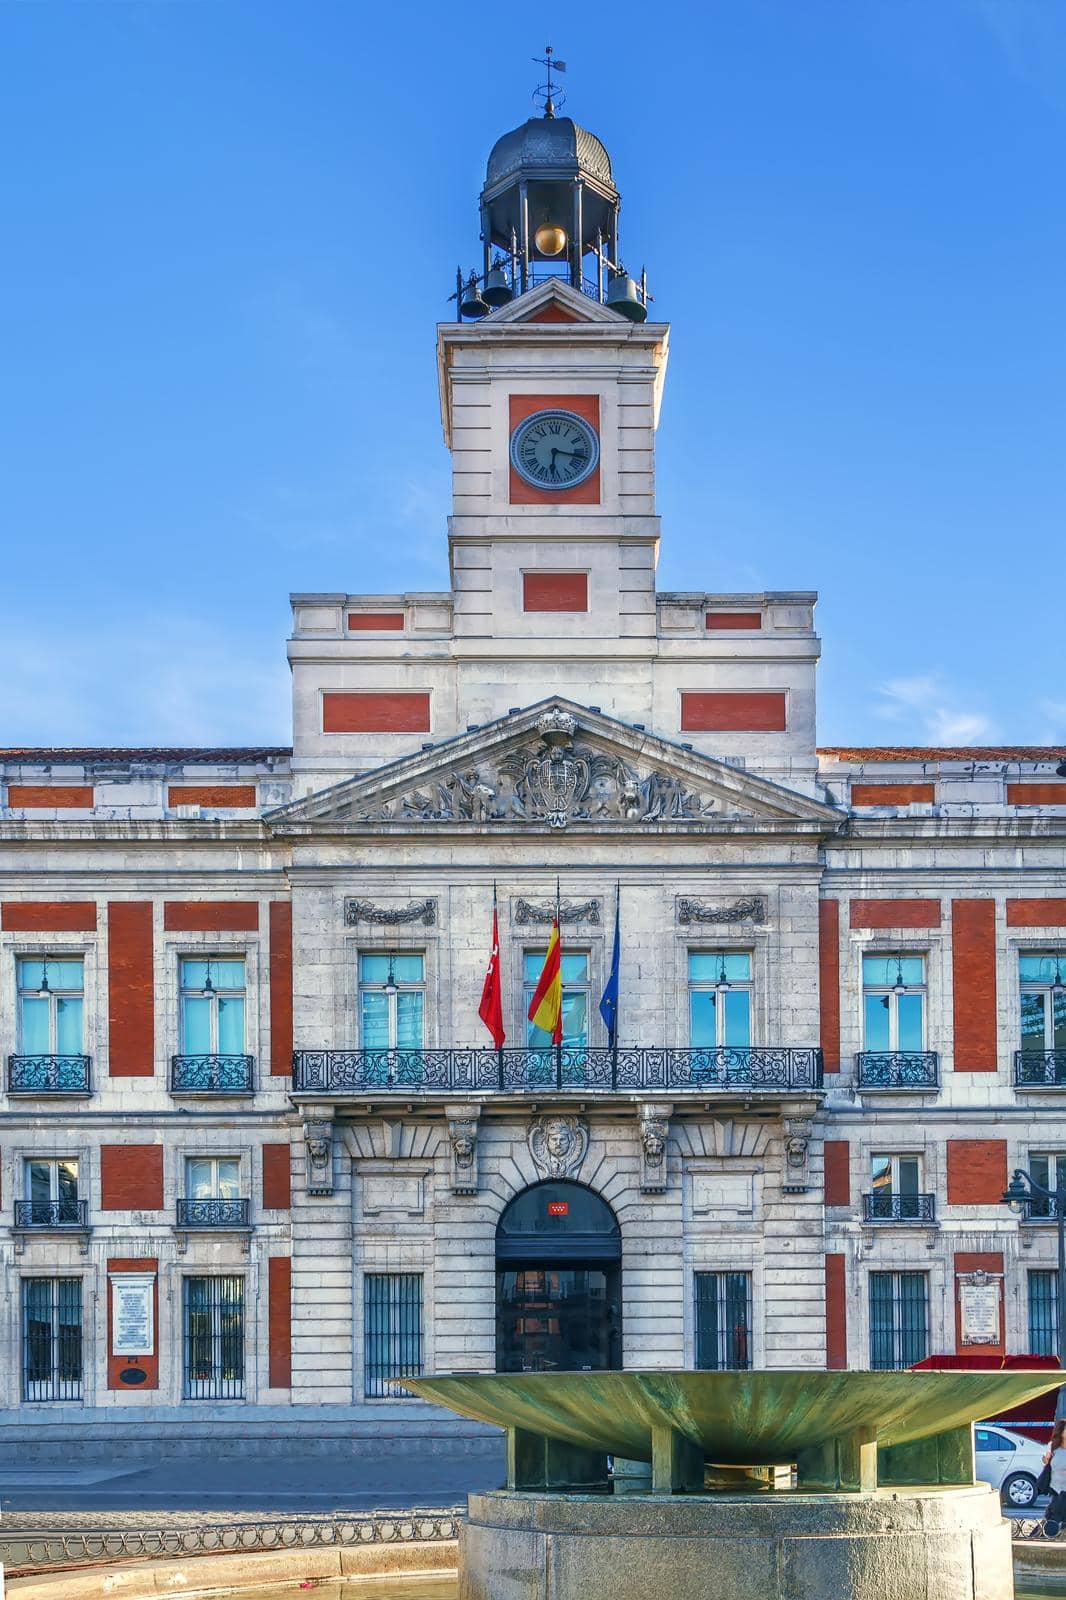 Old post office building, Madrid, Spain by borisb17